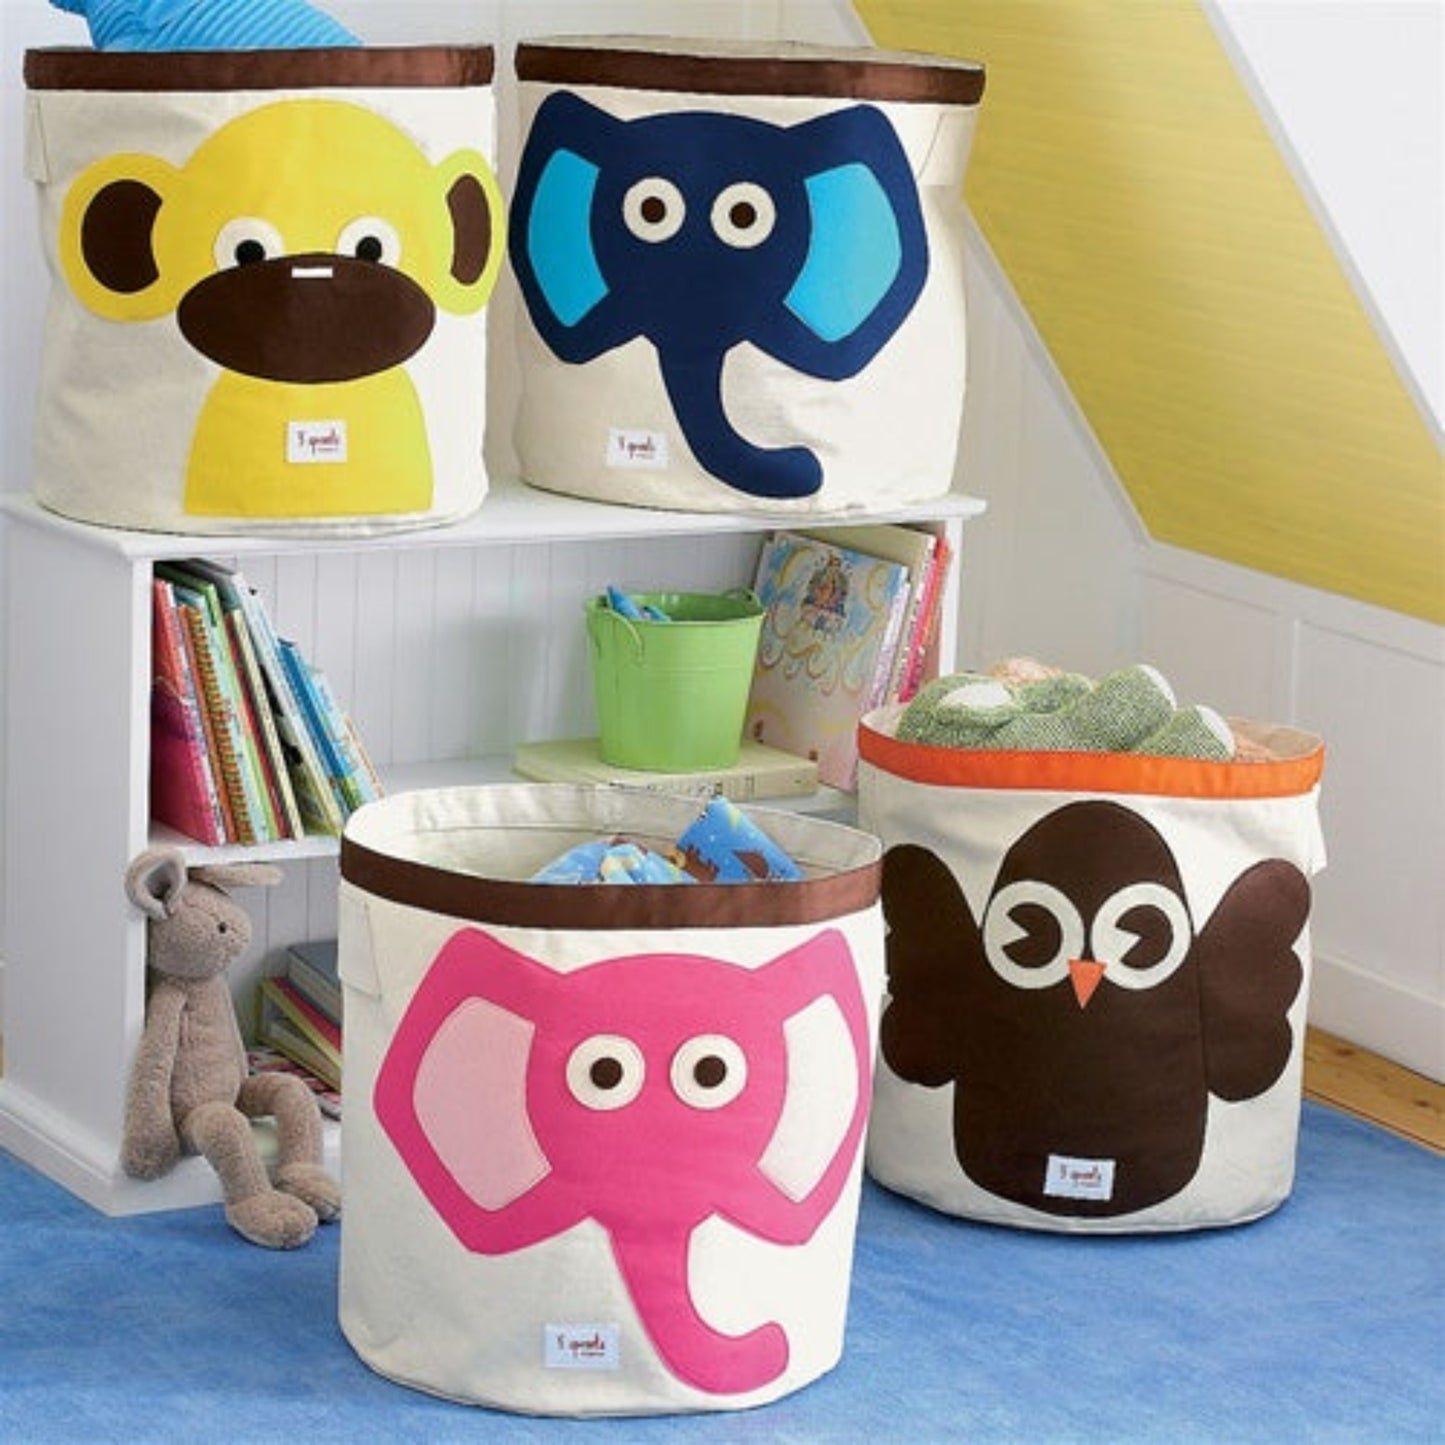 3 Sprouts Children's Storage Bin - Elephant (Pink) 3 Sprouts 39.95